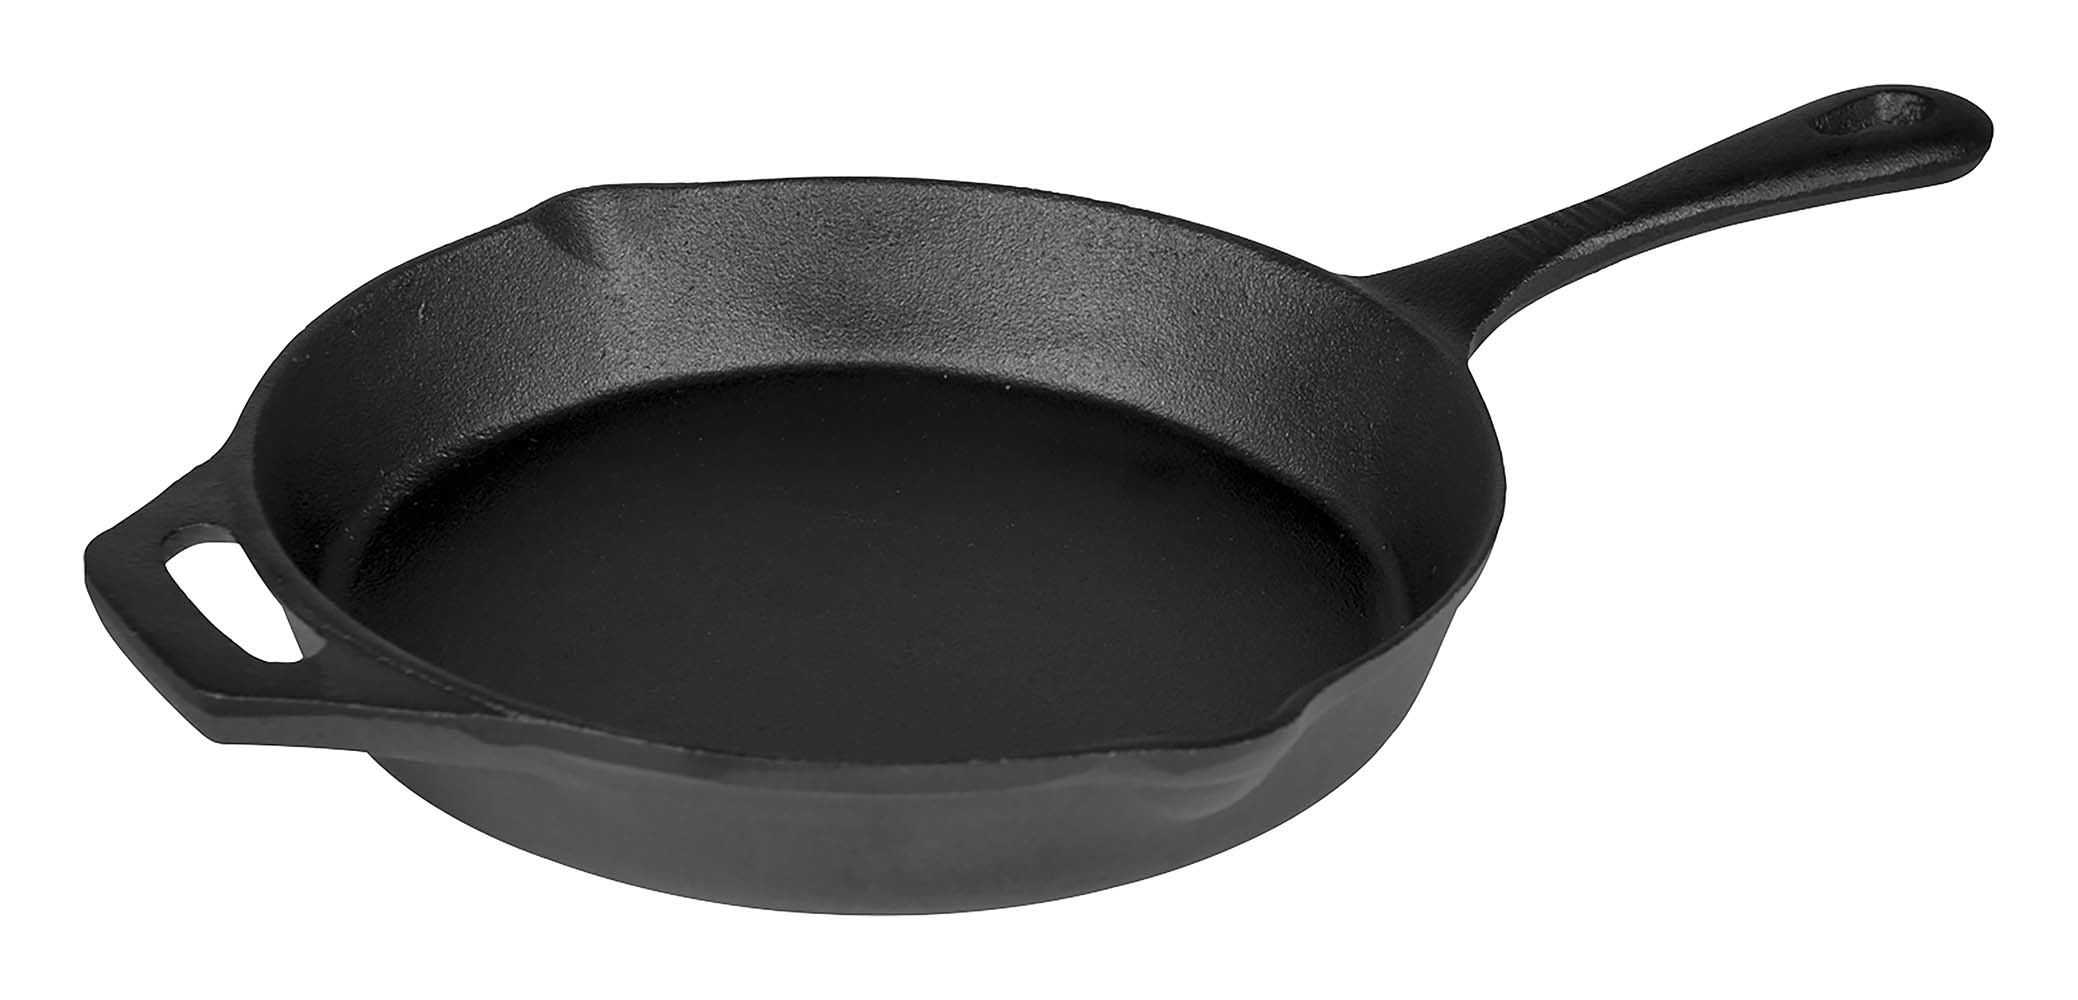 2122425 A traditional and multifunctional cast iron frying pan. This cooking pan is extremely suitable for preparing meals over an open fire or hot coals. The solid cast iron ensures optimum heat distribution.